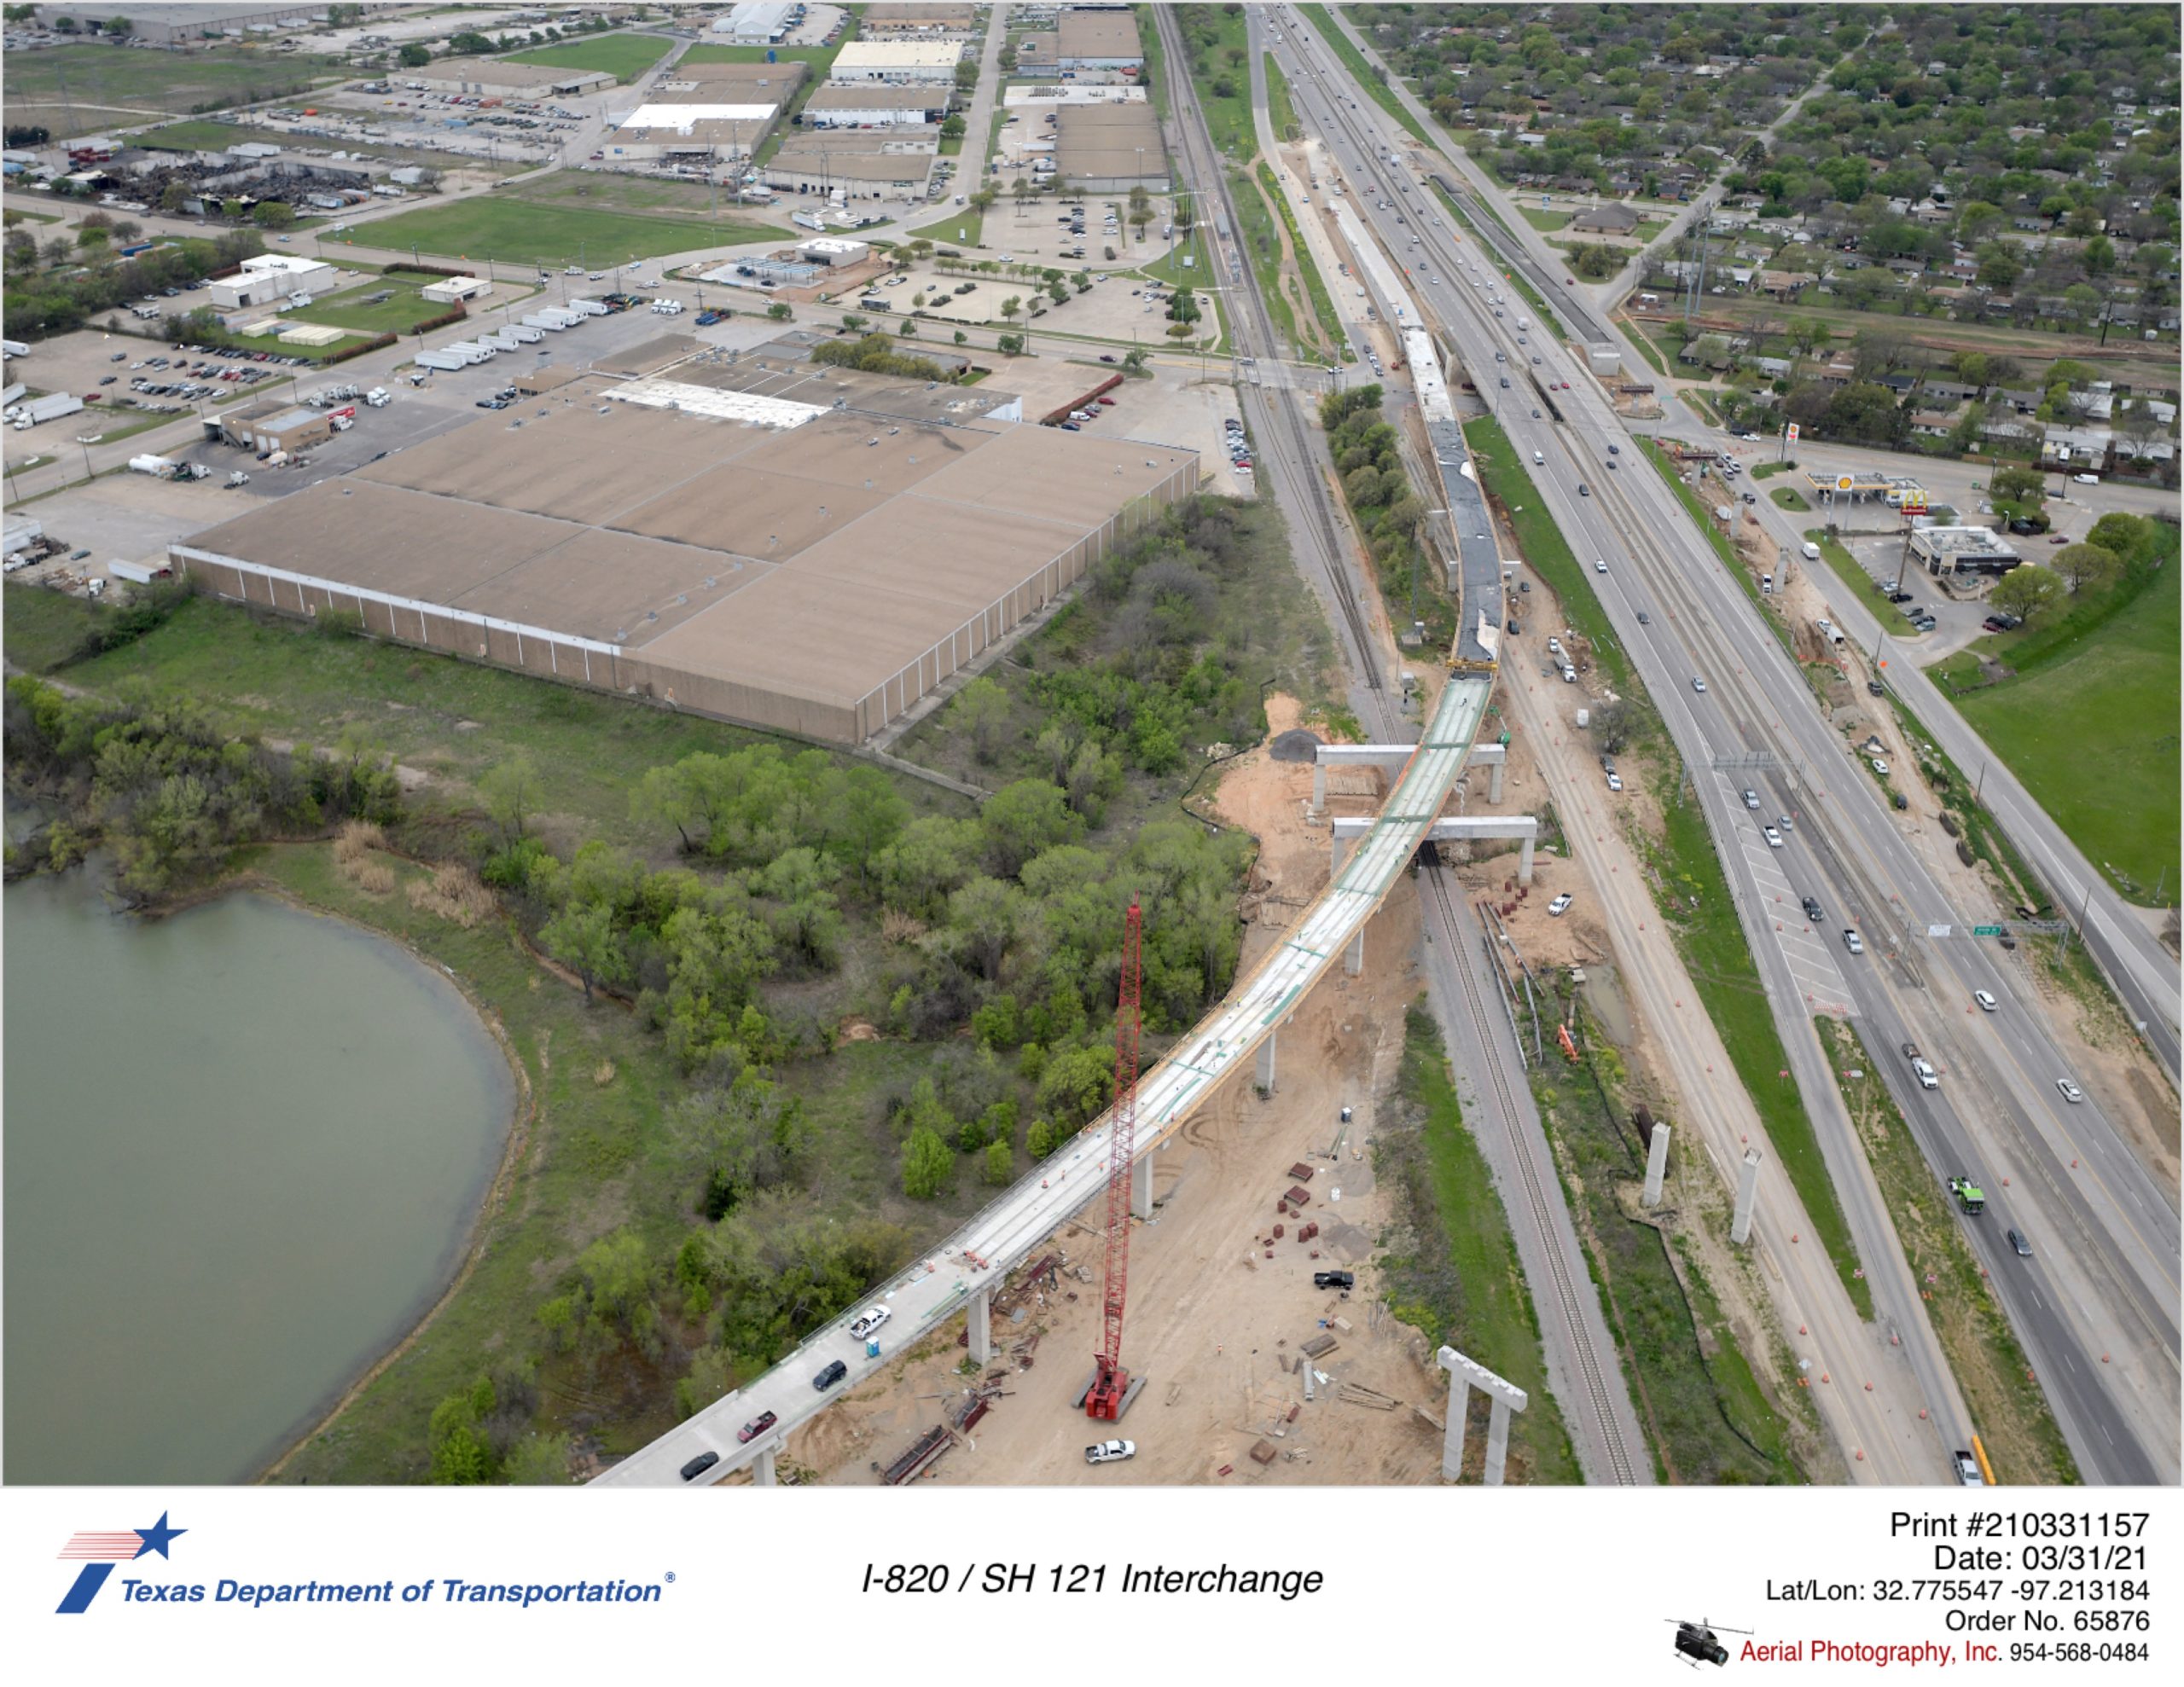 SH 121 looking west at Handley-Ederville Rd interchange focusing on construction of direct connector connections with SH 121 under construction.